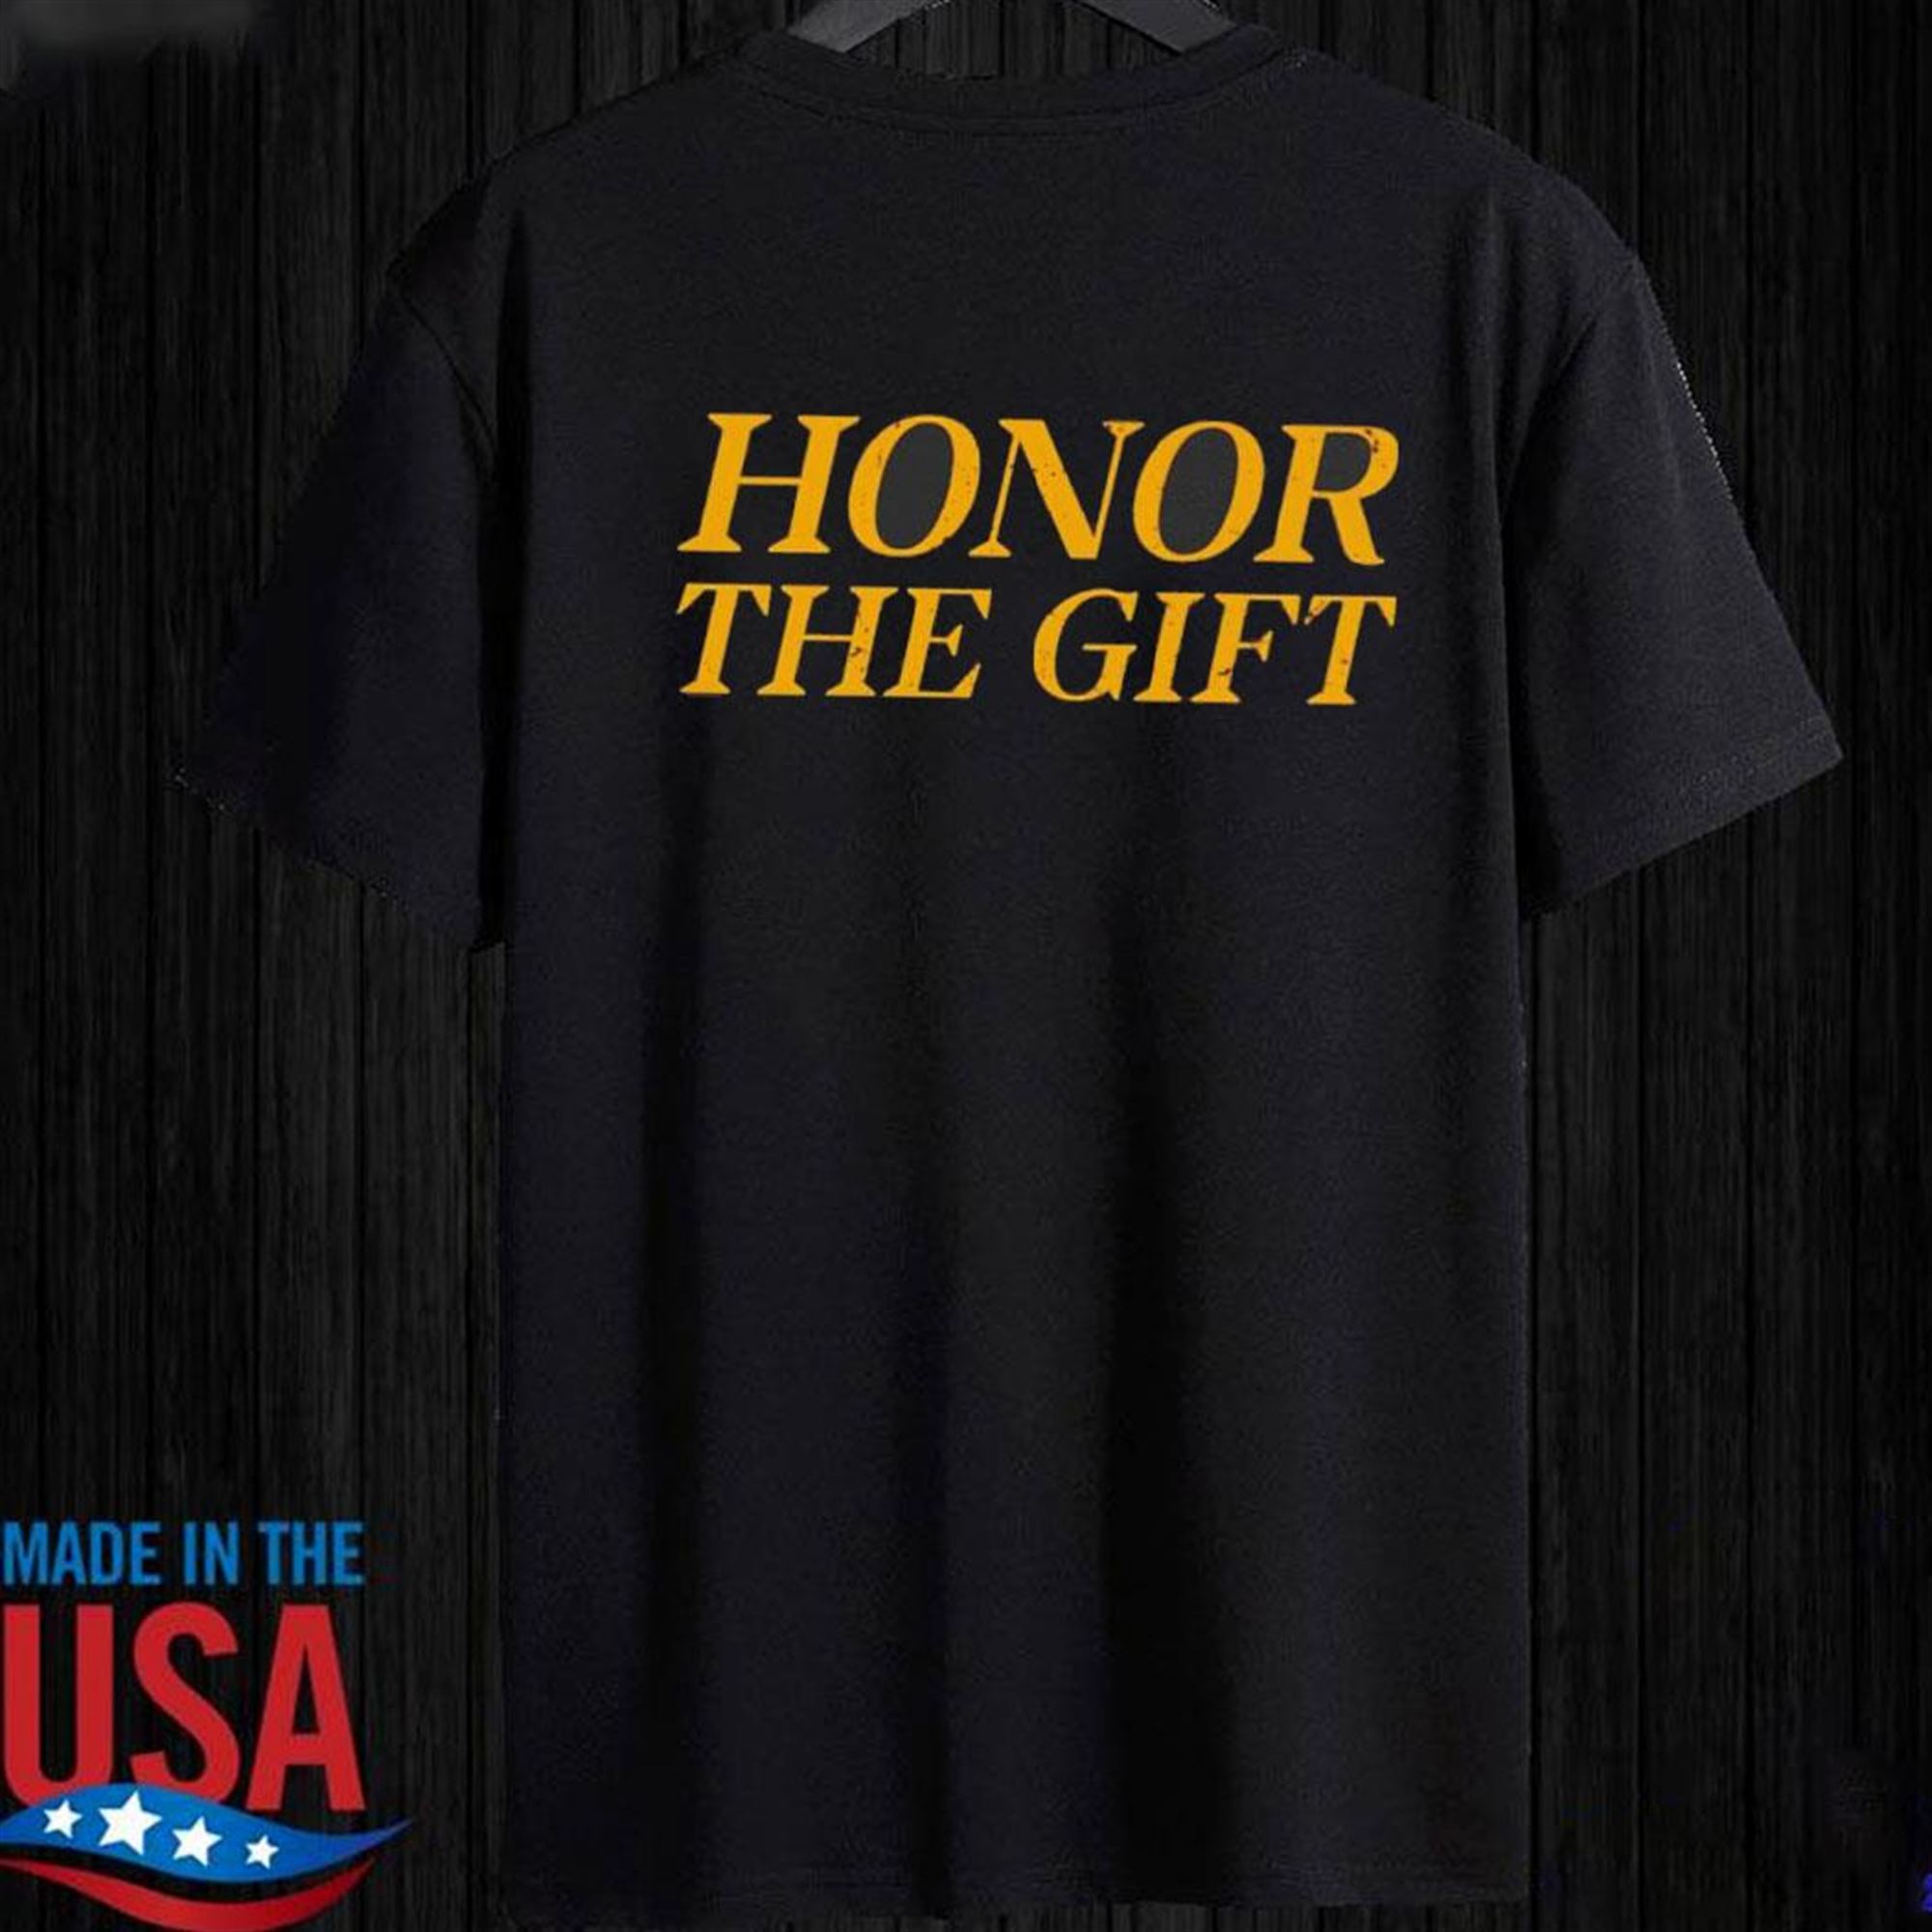 honor the gift t shirt